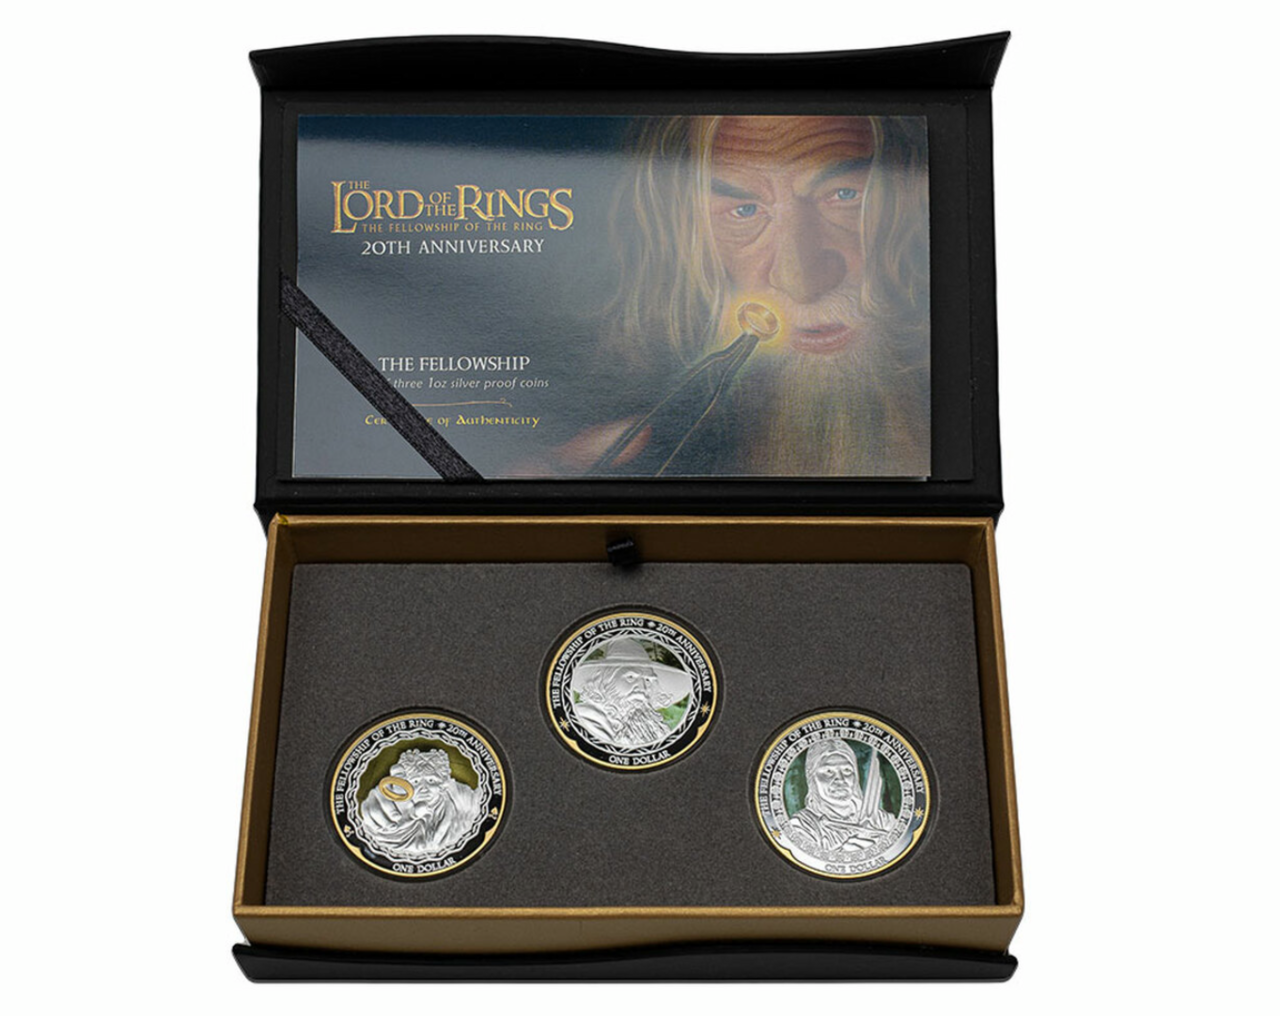 The Lord of the Rings commemorative coins are on the way